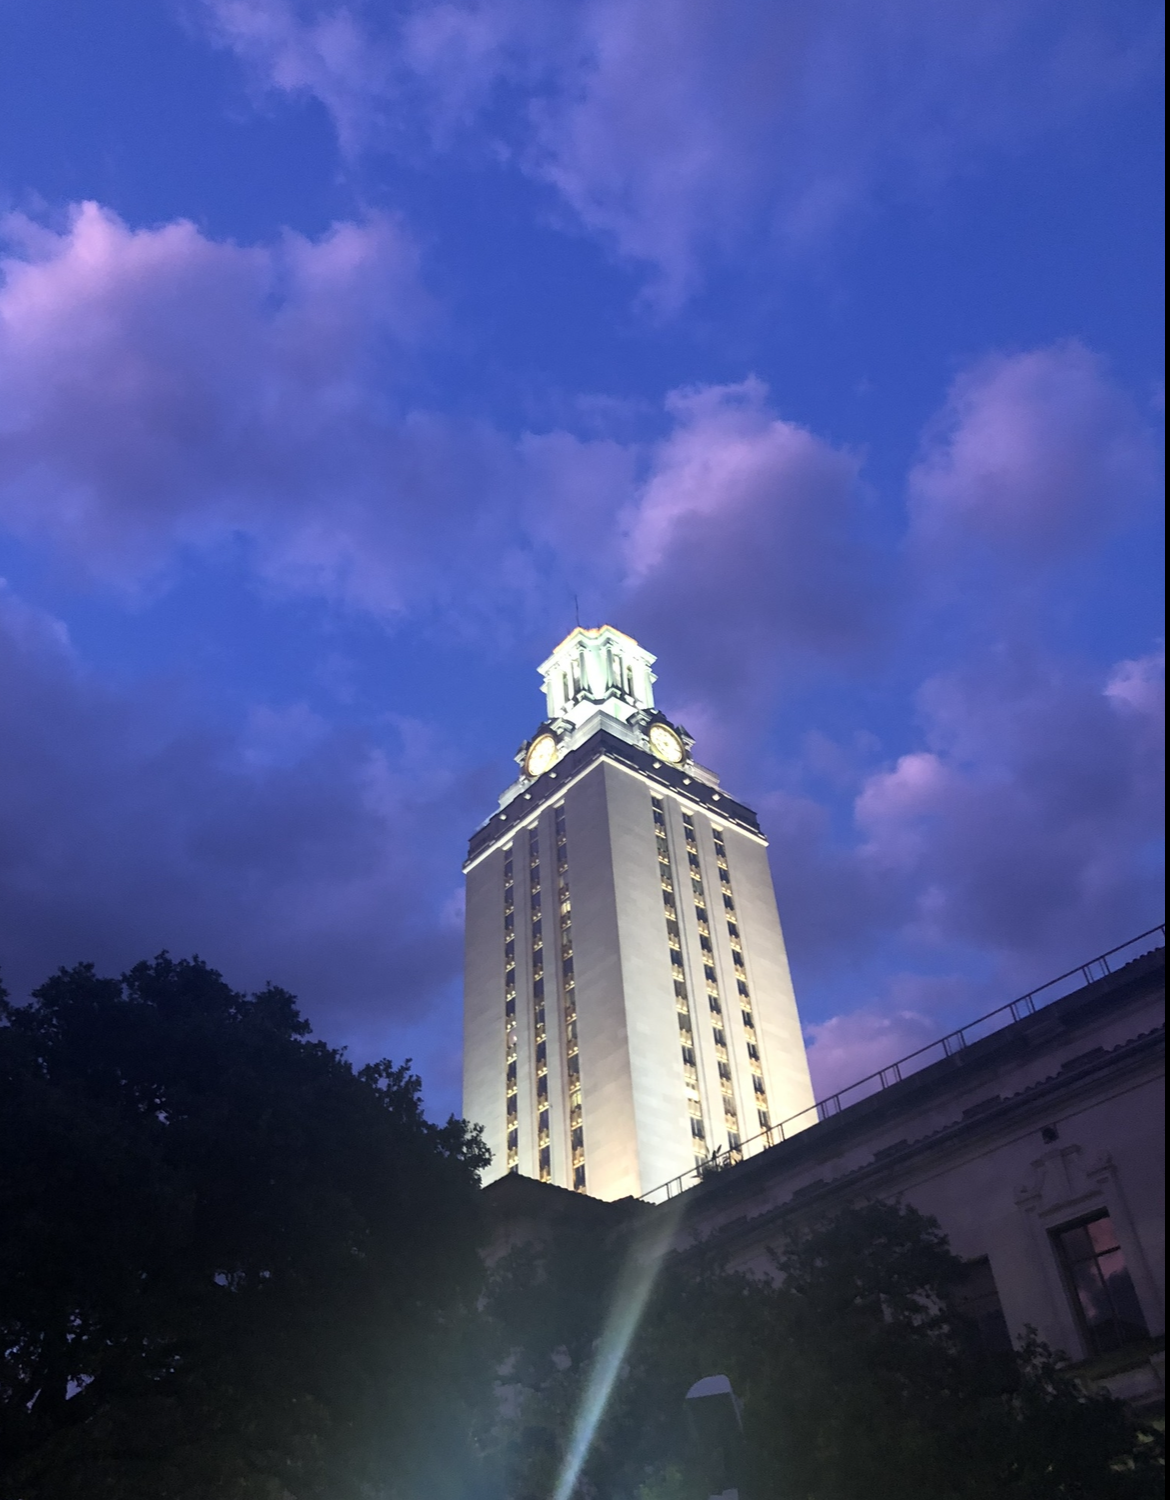 UT Tower with a purple sky